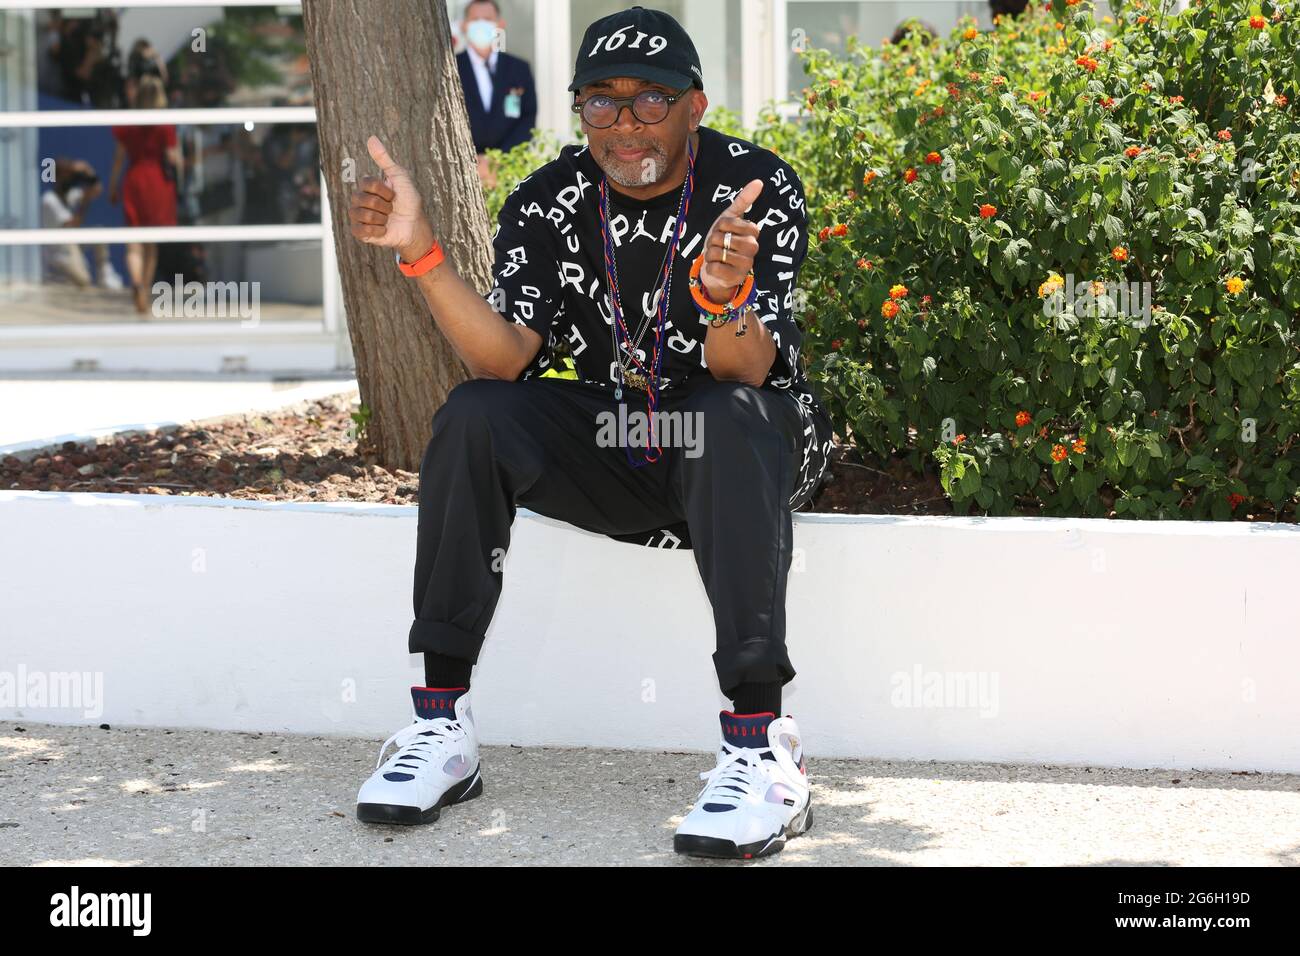 July 6, 2021, Cannes, Provence Alpes Cote d'Azur, France: Spike LEE's shoes  during the Official Jury's photocall as part of the 74th annual Cannes Film  Festival on July 6th 2021 in Cannes,